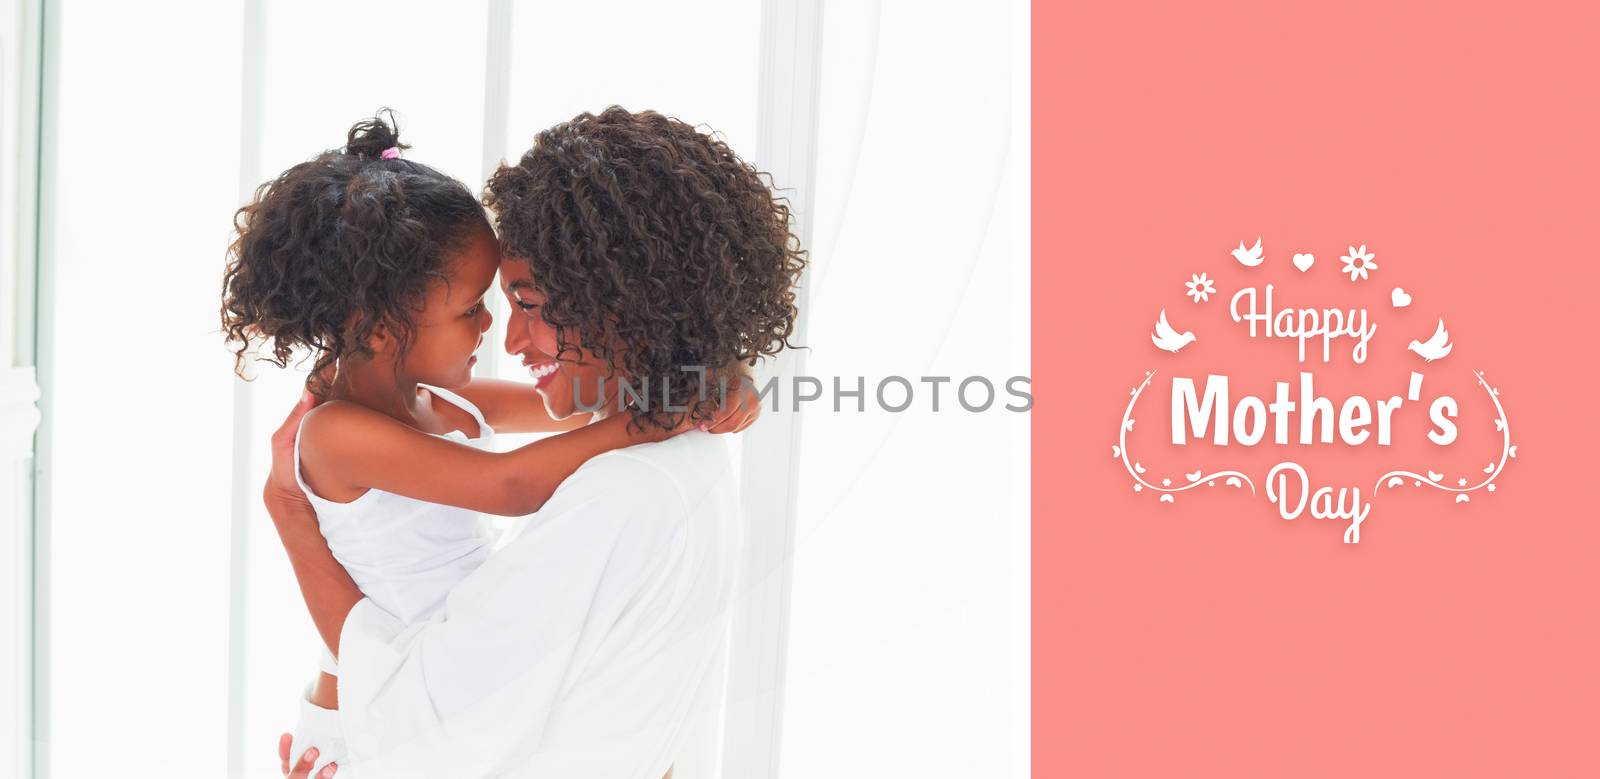 Composite image of mothers day greeting by Wavebreakmedia